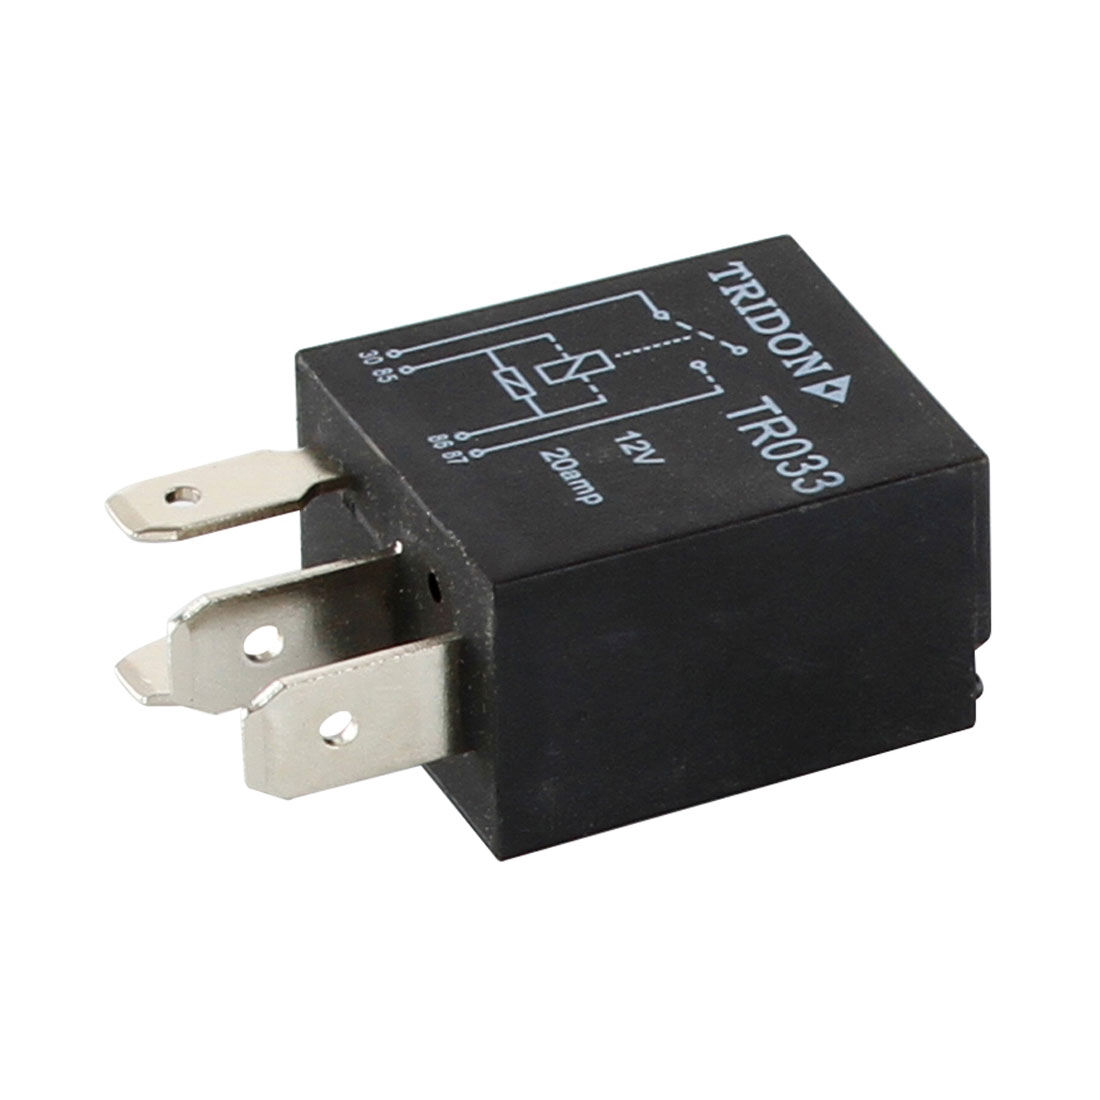 Tridon Relay - Micro, 12V 20 AMP 4 Pin, Non Outage - TR033PAC, , scaau_hi-res